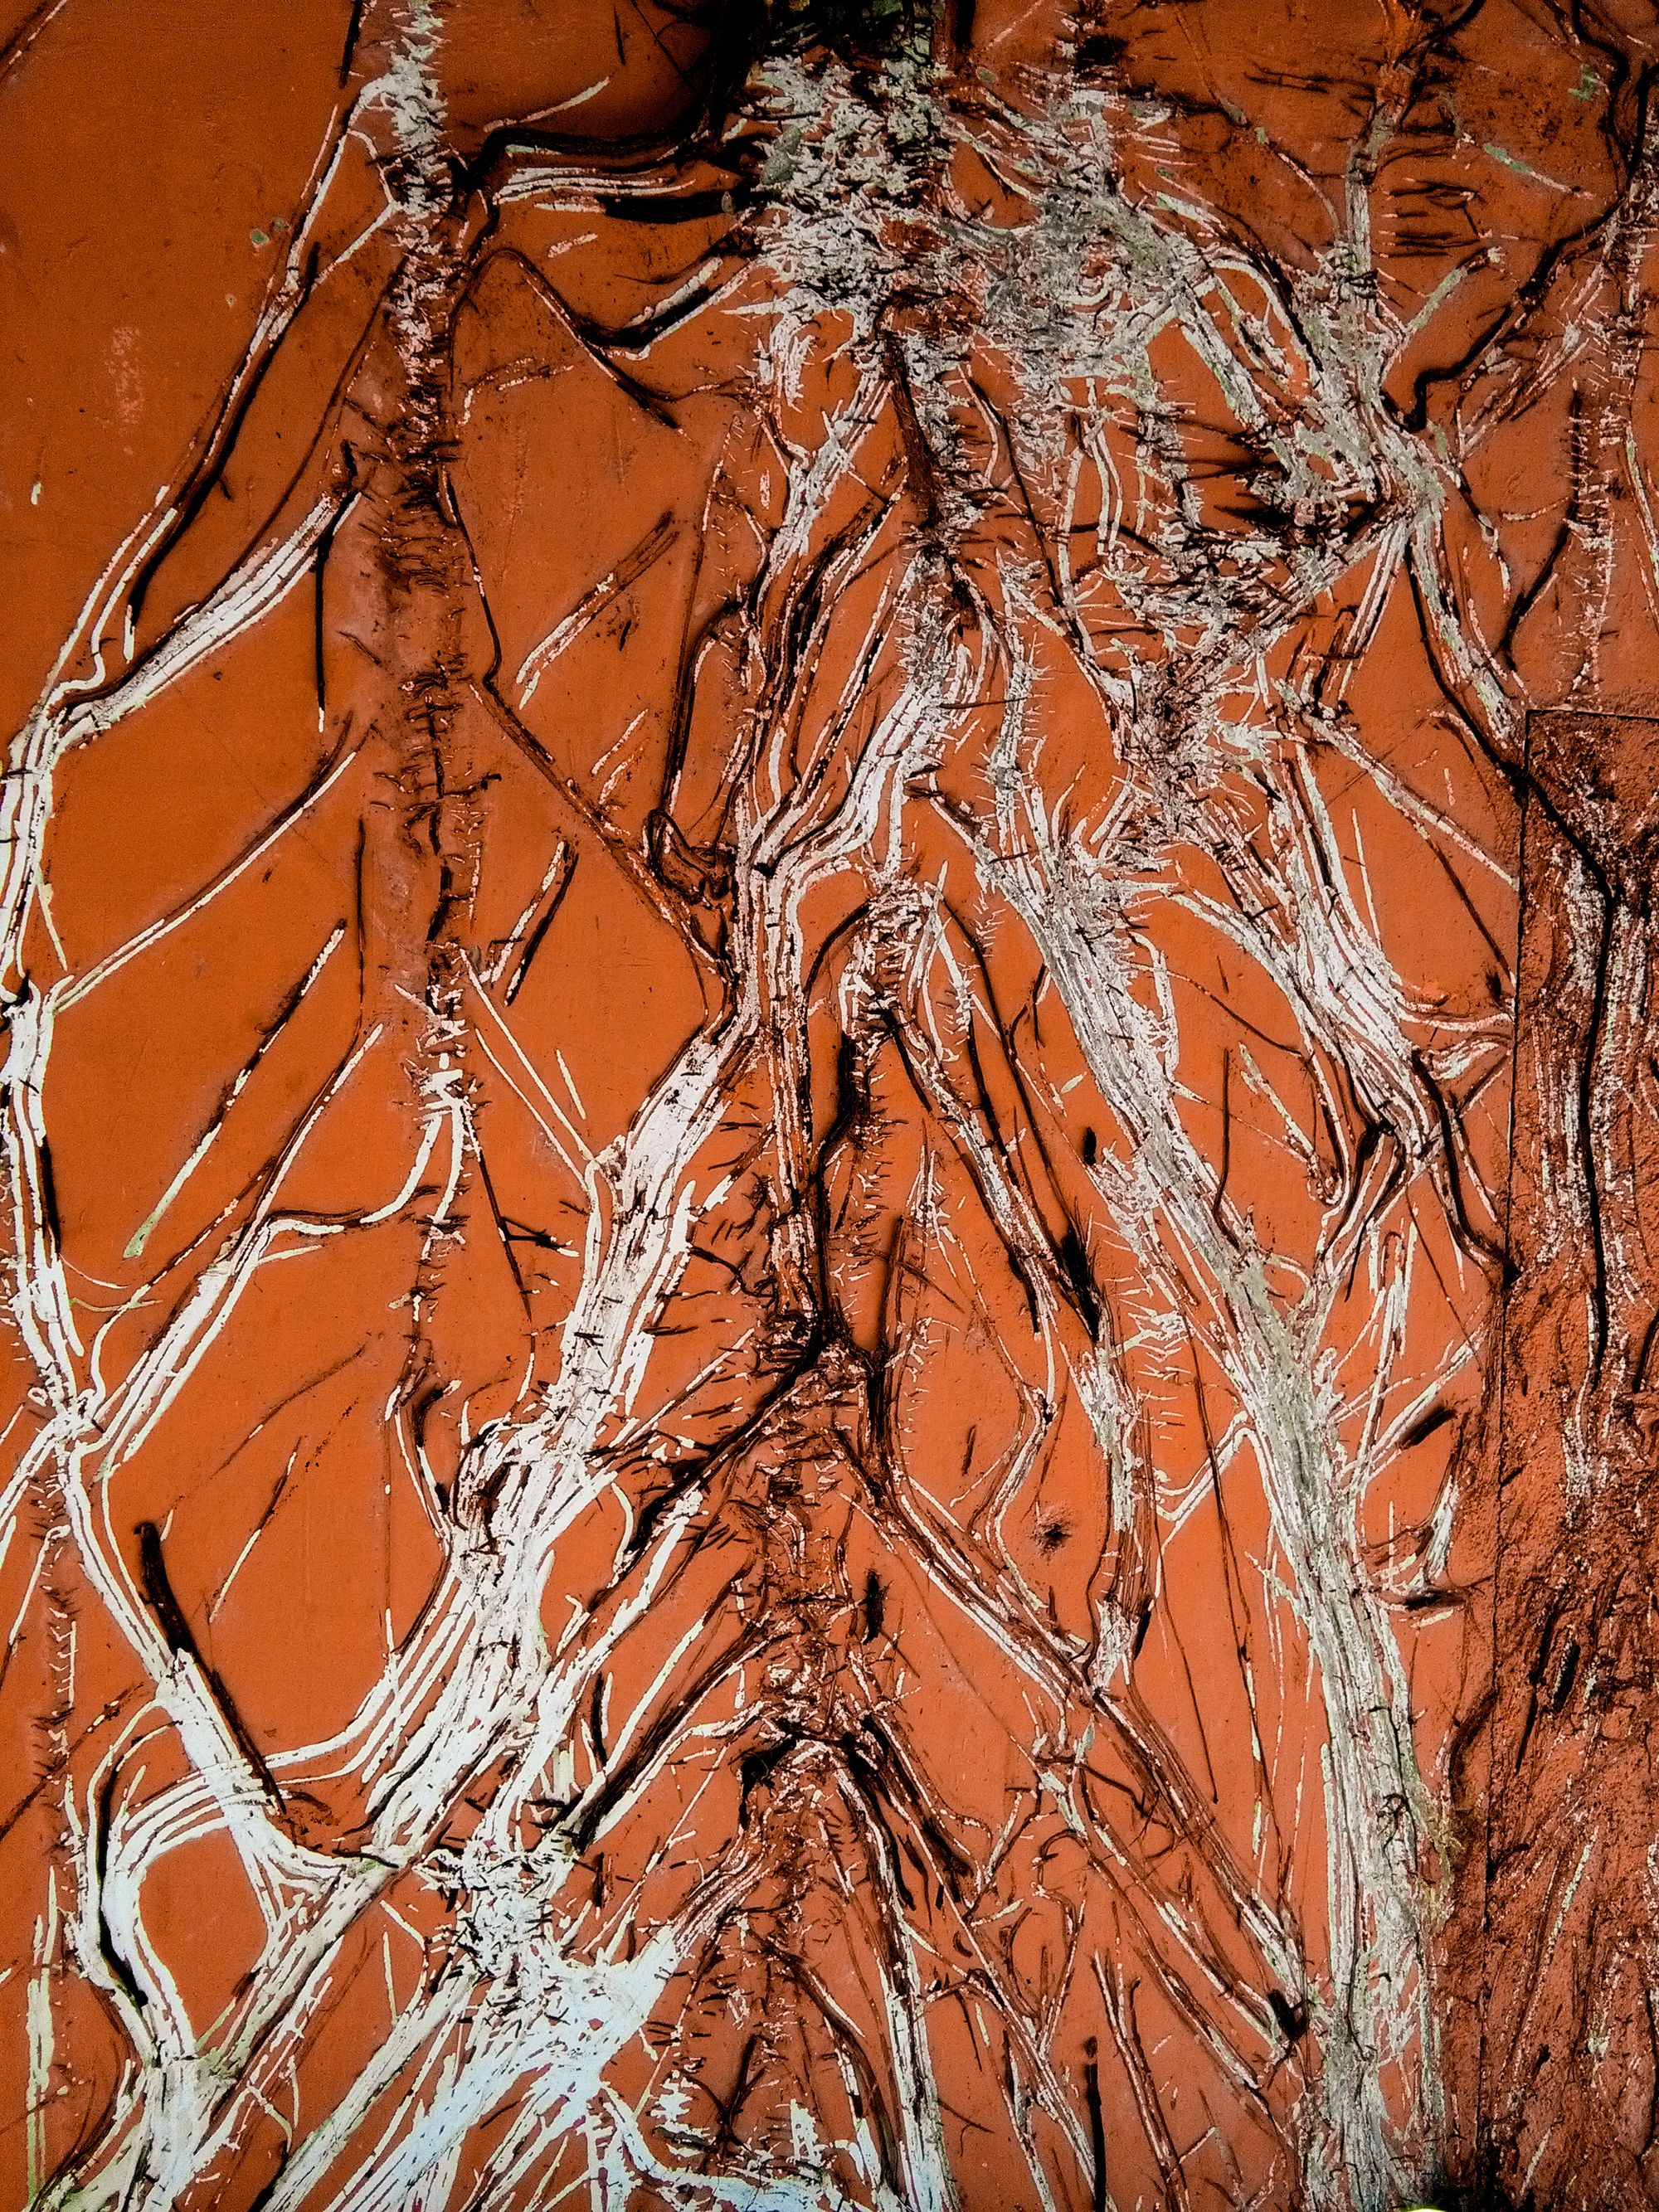 An image of branches on an orange background.